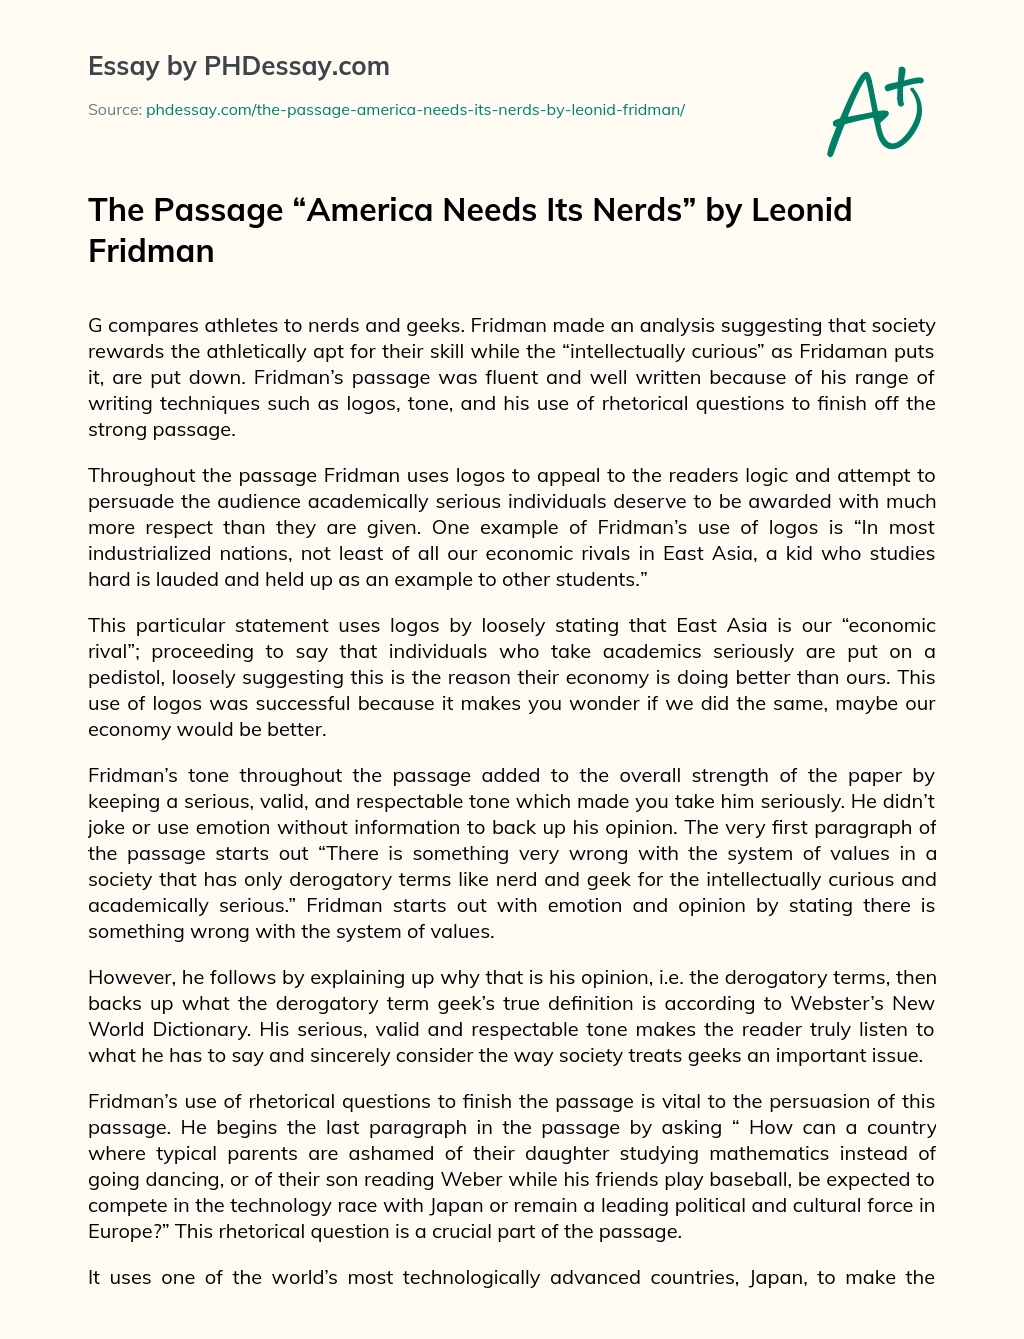 The Passage “America Needs Its Nerds” by Leonid Fridman essay